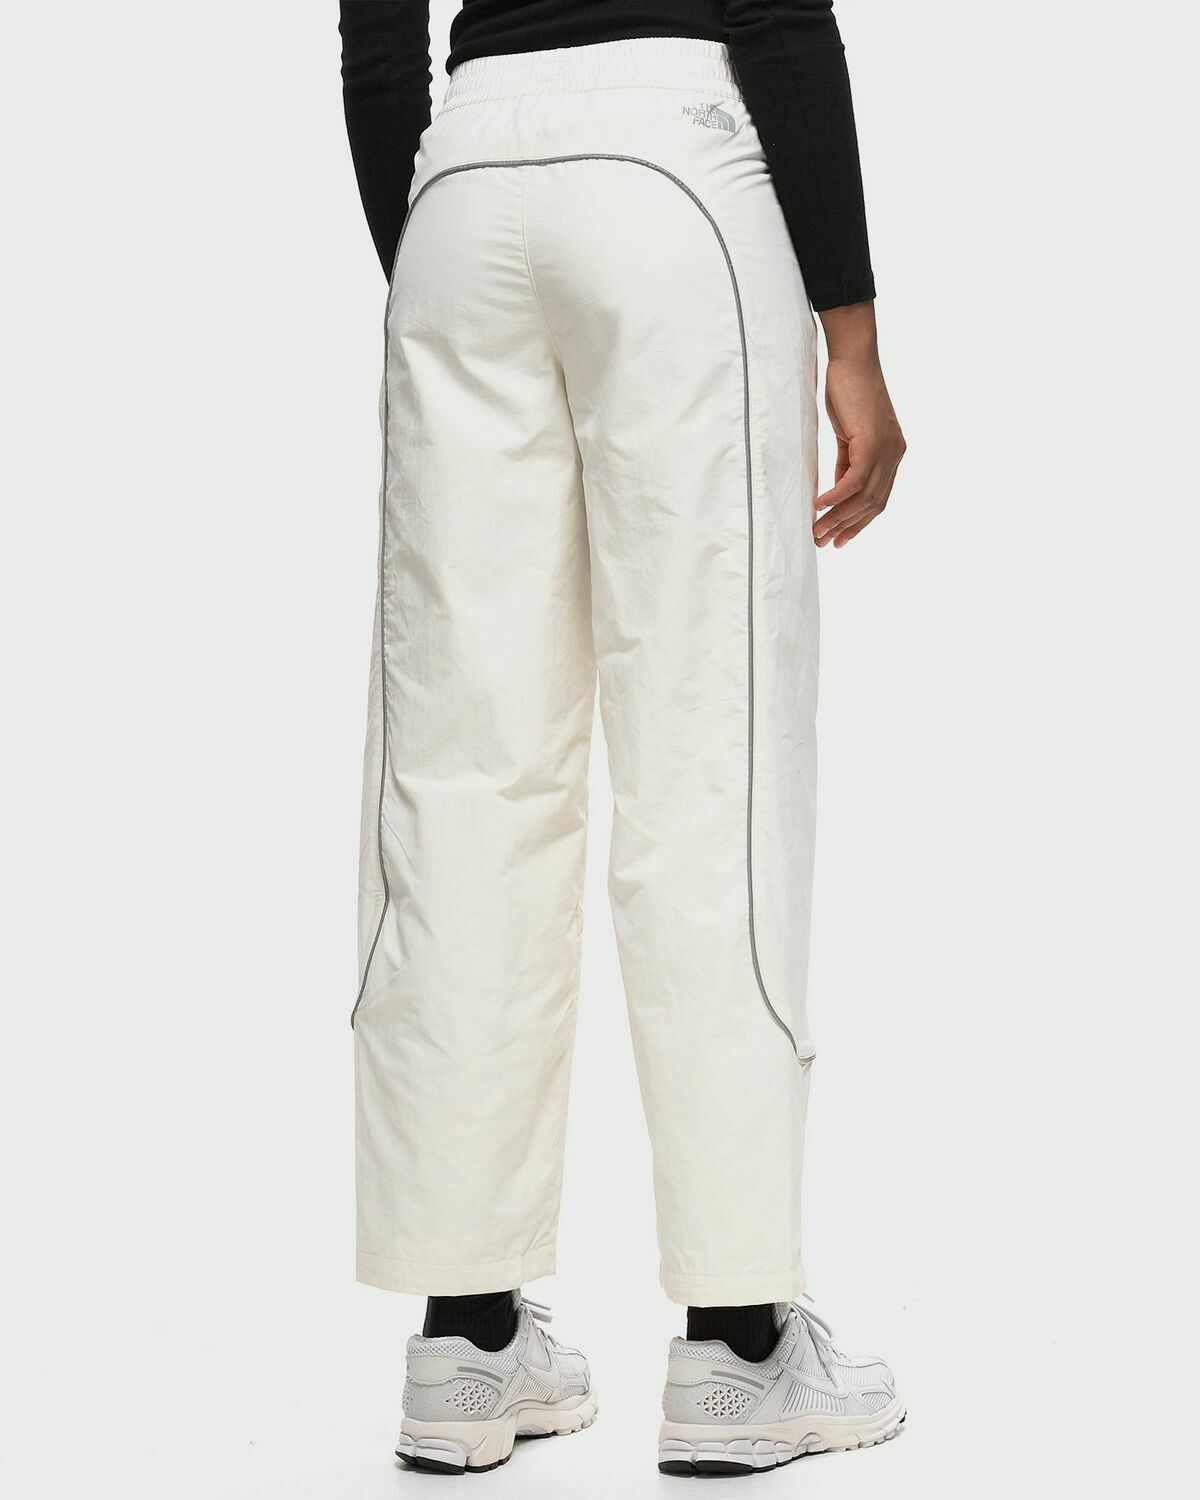 The North Face Women's Tek Piping Wind Pant Black